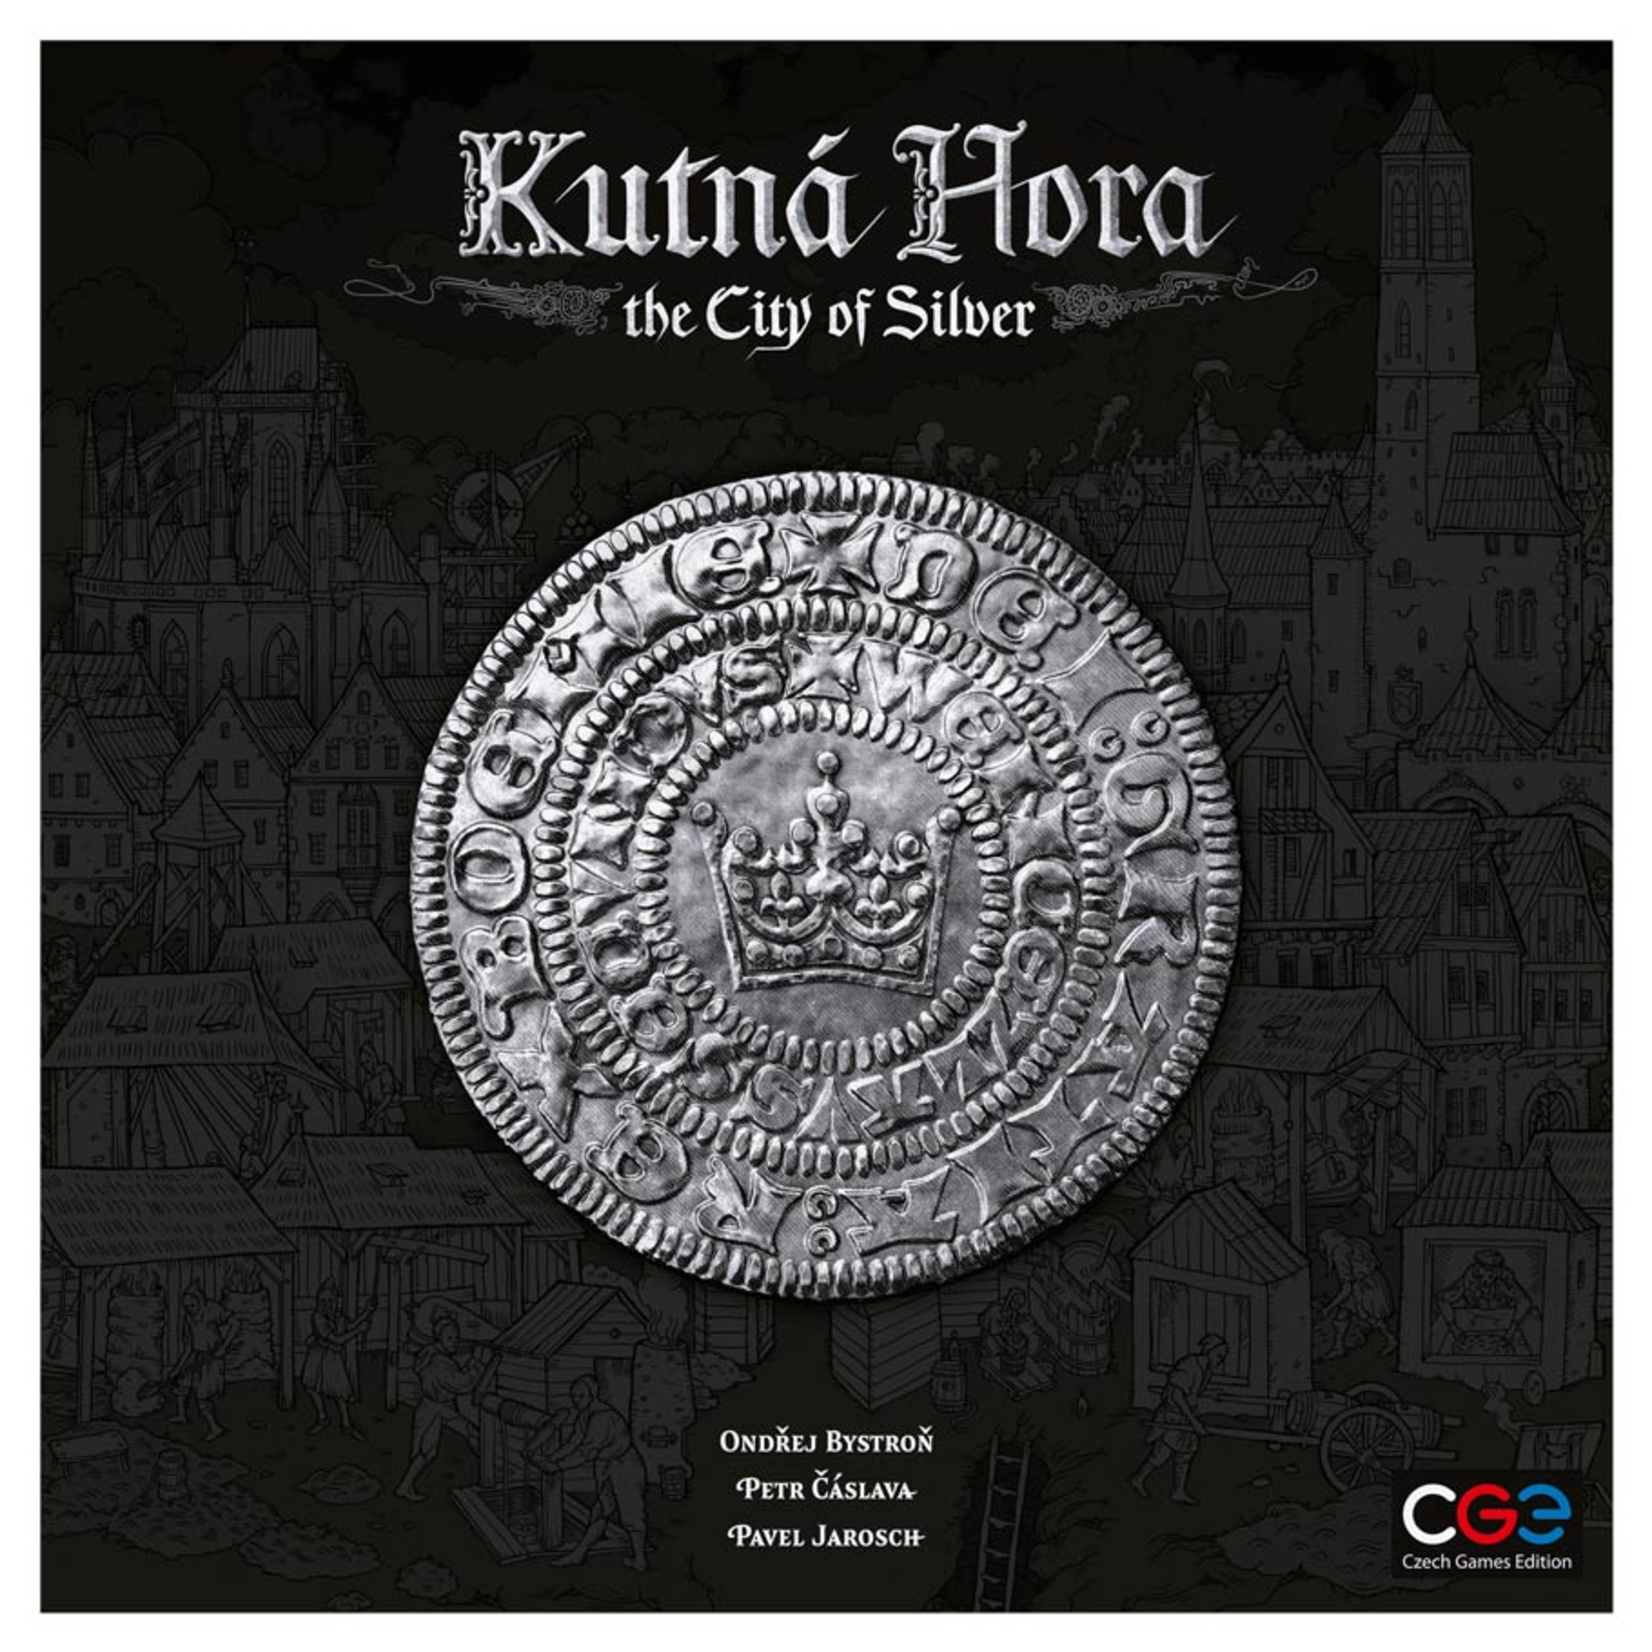 Czech Games Editions Kutna Hora The City of Silver